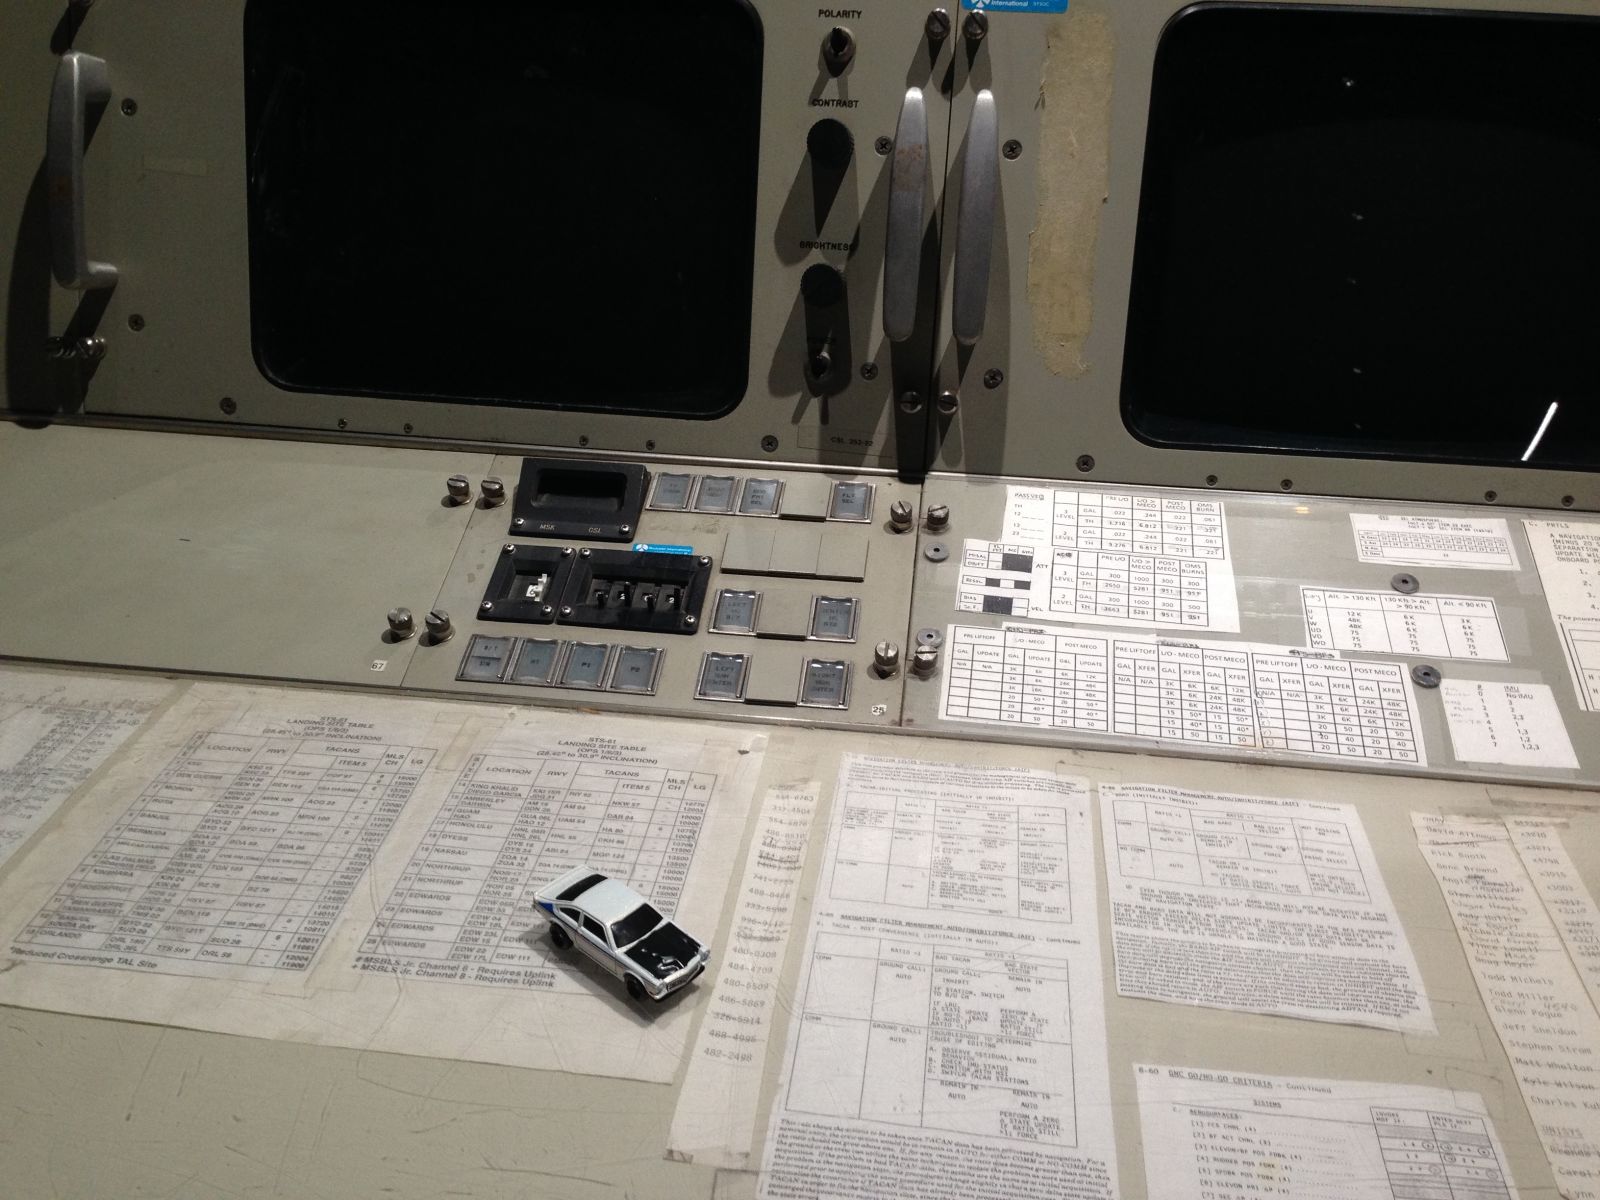 One of the many desks from mission control, with launch procedures still attached